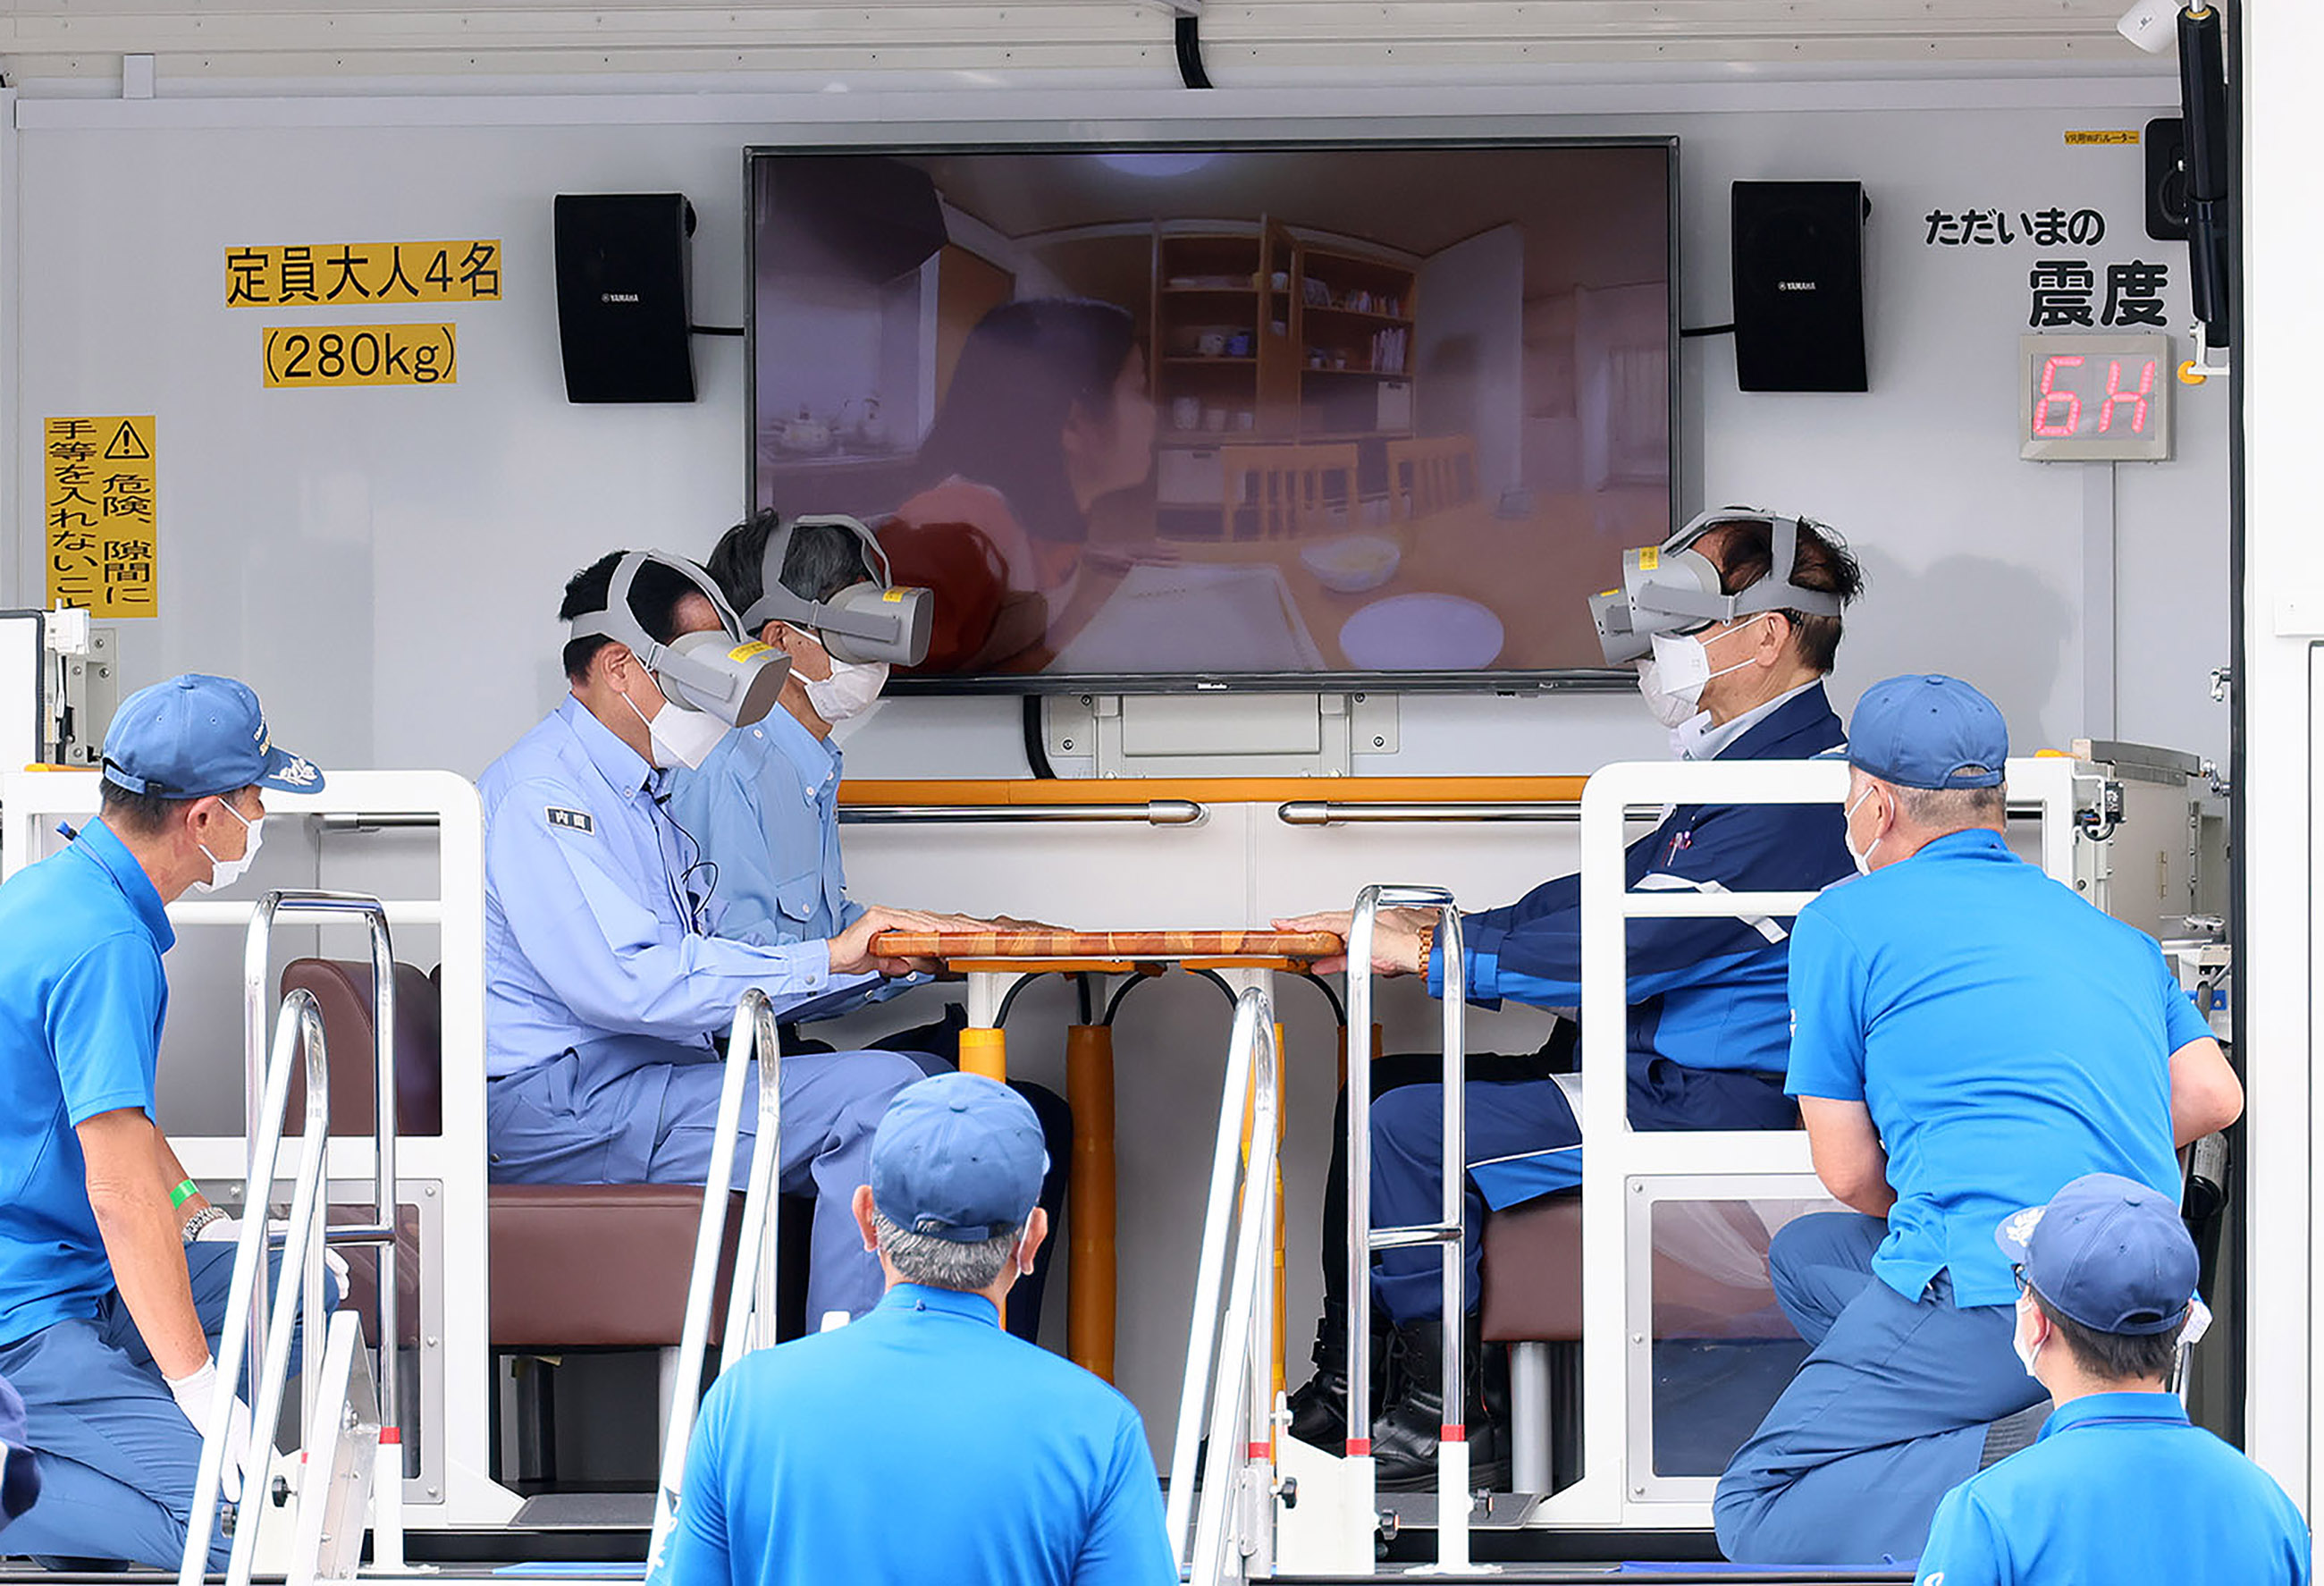 Photograph of the Prime Minister experiencing a VR earthquake simulation vehicle